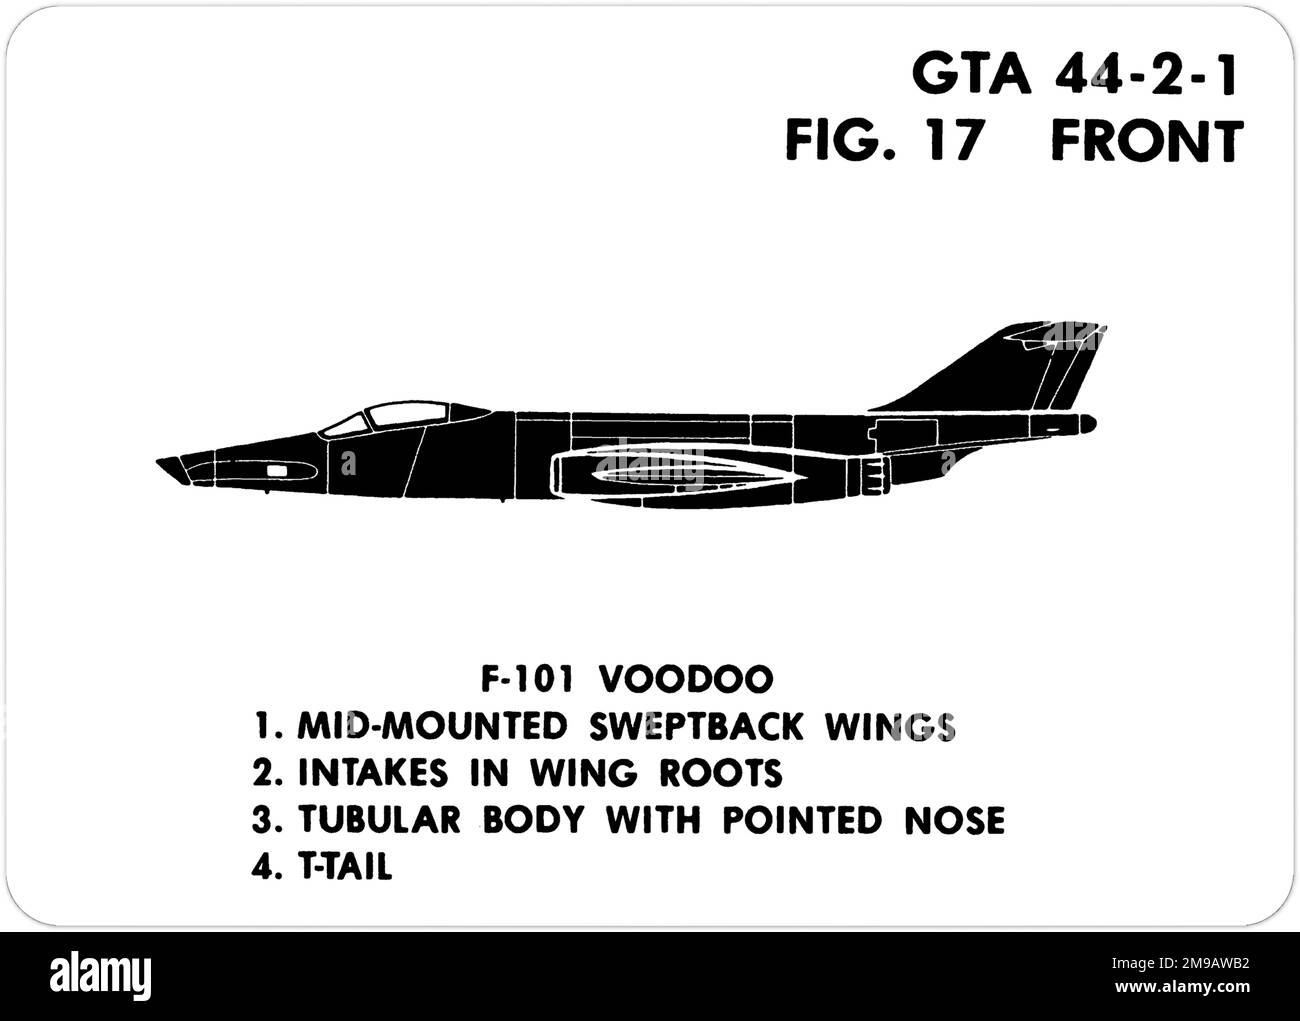 McDonnell RF-101C Voodoo. This is one of the series of Graphics Training Aids (GTA) used by the United States Army to train their personnel to recognize friendly and hostile aircraft. This particular set, GTA 44-2-1, was issued in July1977. The set features aircraft from: Canada, Italy, United Kingdom, United States, and the USSR. Stock Photo